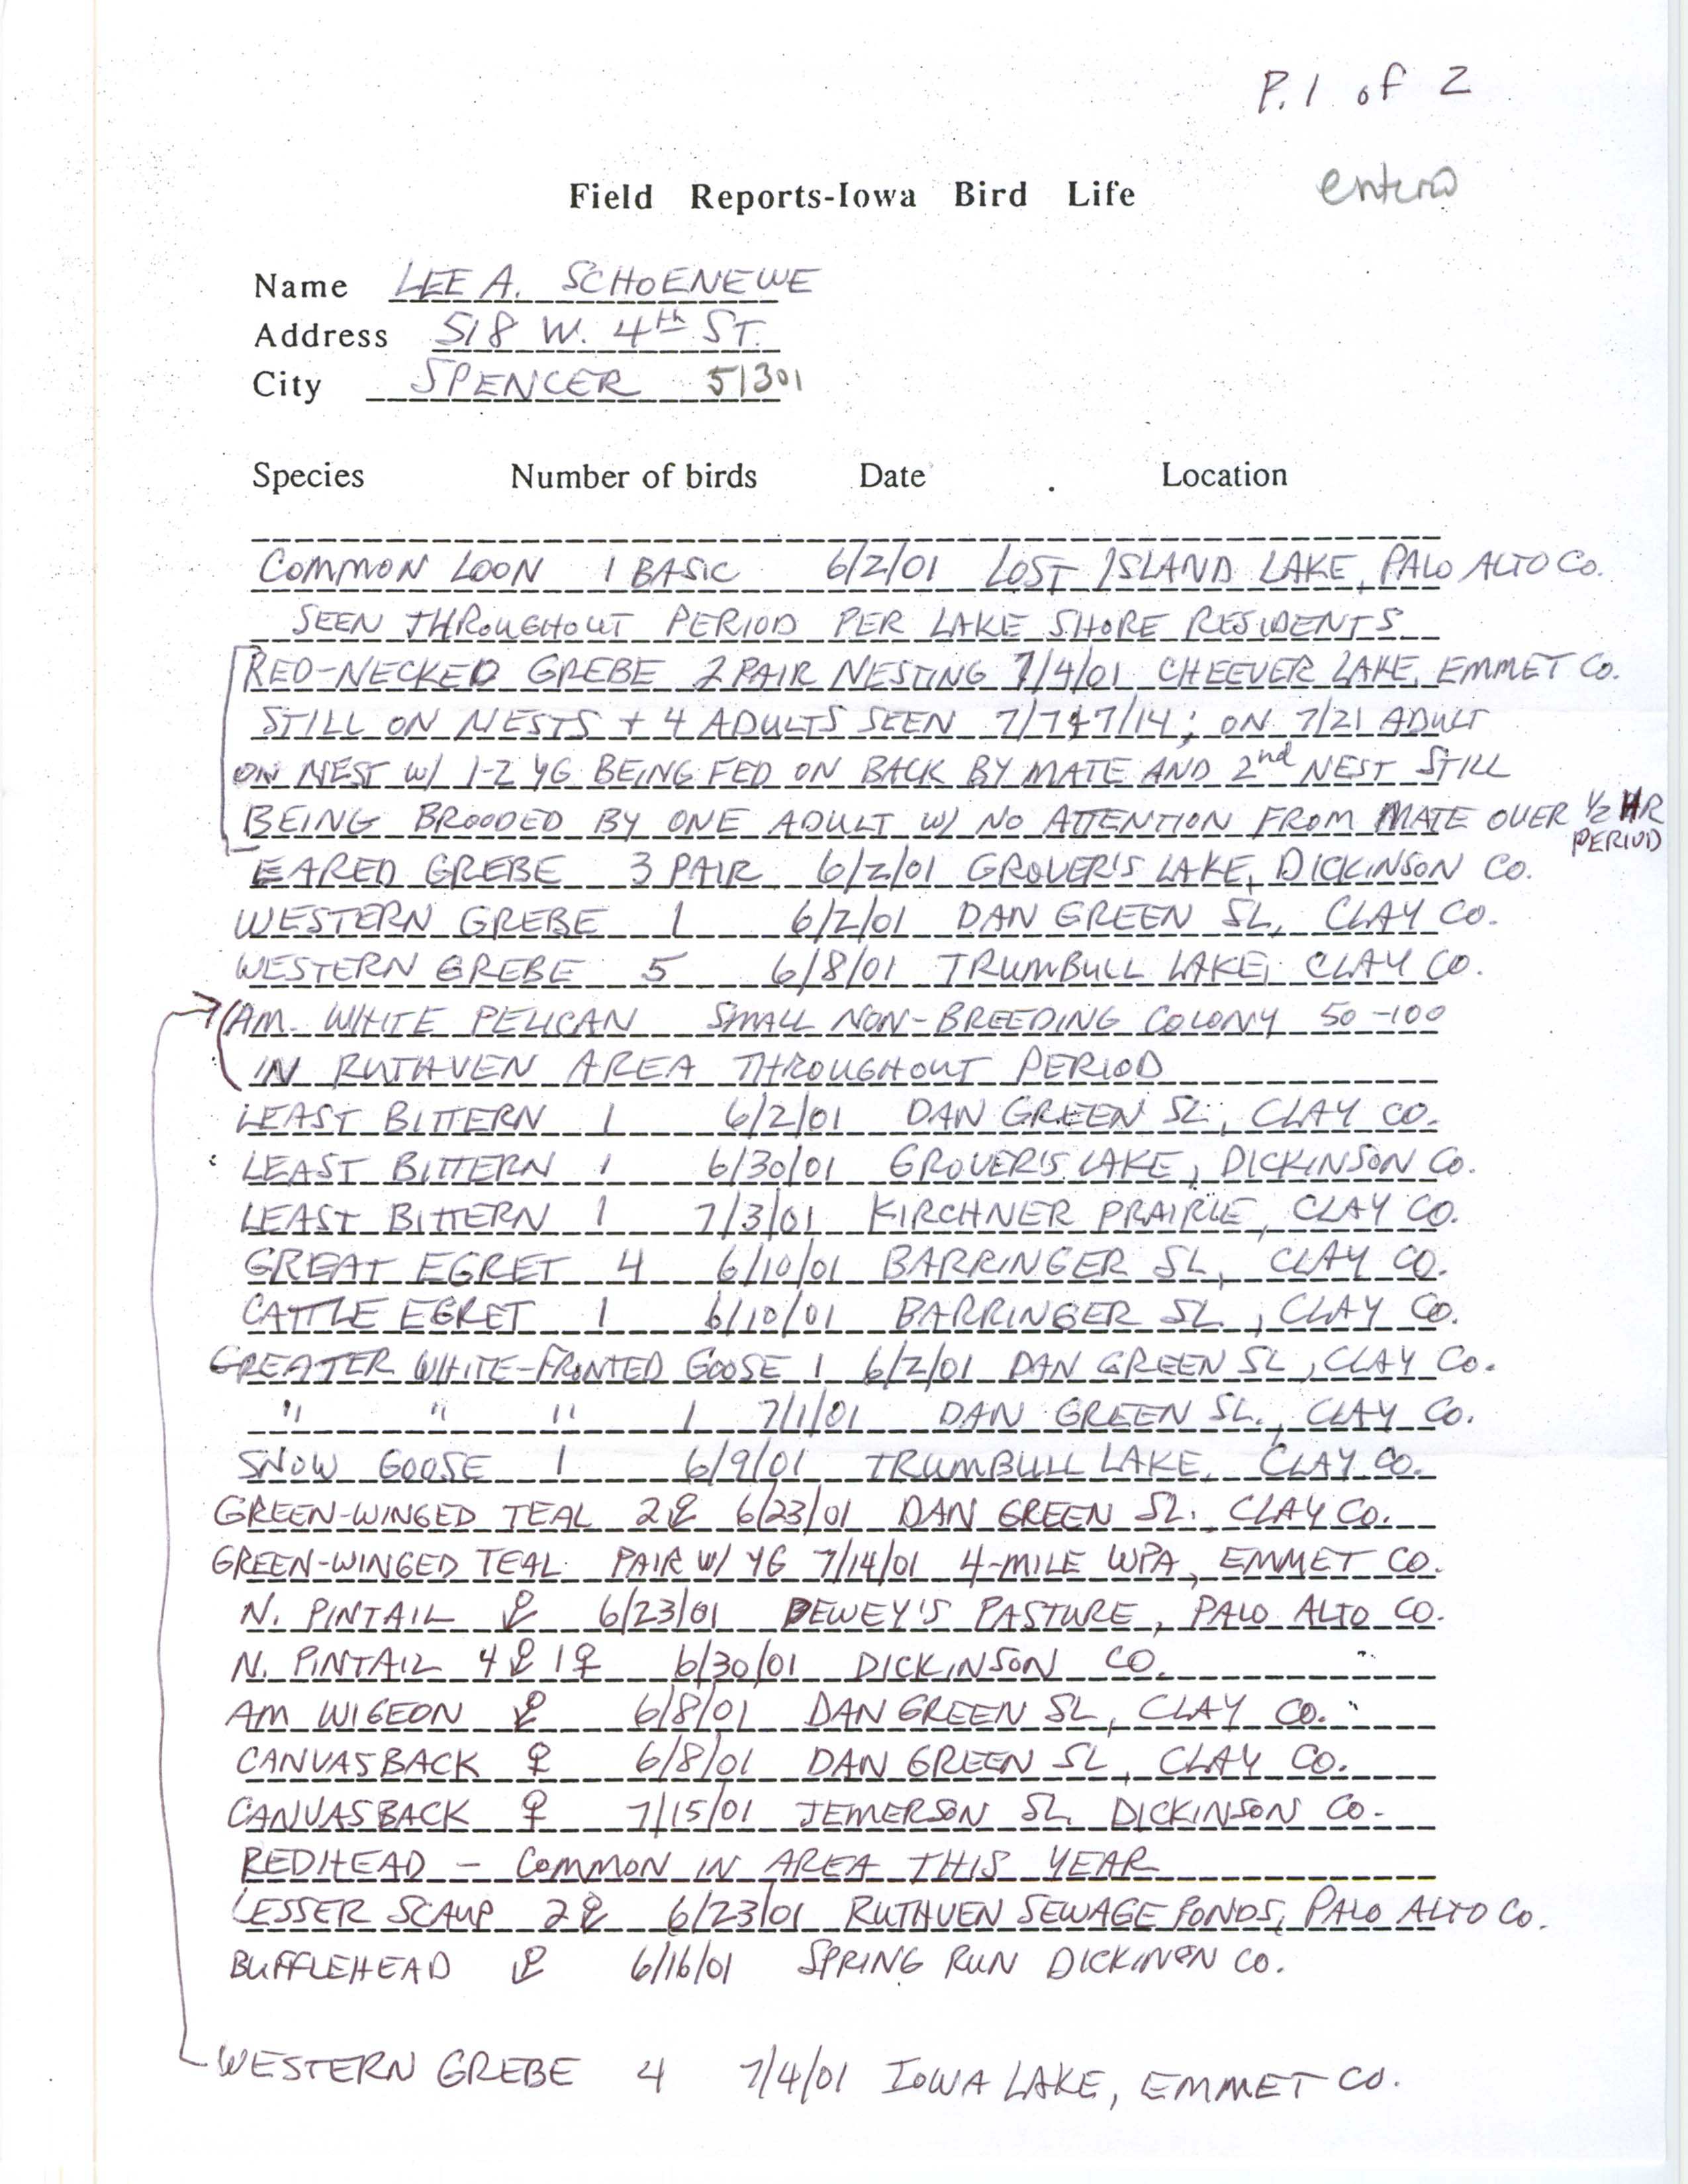 Field notes contributed by Lee A. Schoenewe, summer 2001